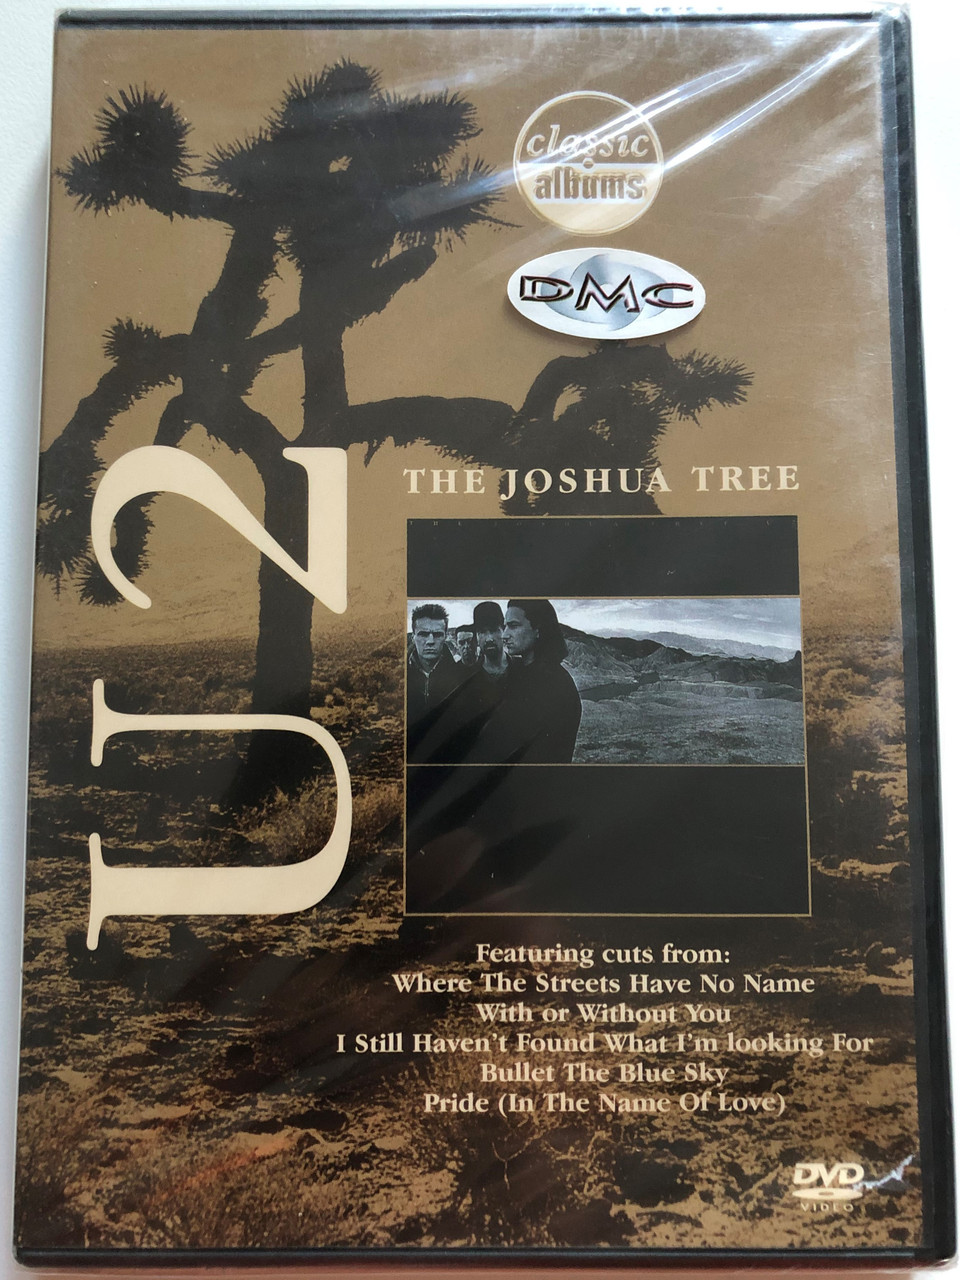 https://cdn10.bigcommerce.com/s-62bdpkt7pb/products/0/images/259522/U2_The_Joshua_Tree_Classic_Albums_Featuring_cuts_from_Where_The_Streets_Have_No_Name_With_Or_Without_You_I_Still_Havent_Found_What_Im_Looking_For_Bullet_The_Blue_Sky_Eagle_Rock_Enter_1__58120.1669378948.1280.1280.JPG?c=2&_gl=1*189r50b*_ga*MjA2NTIxMjE2MC4xNTkwNTEyNTMy*_ga_WS2VZYPC6G*MTY2OTM3MzQ2NS42NDUuMS4xNjY5Mzc4NzgxLjQ1LjAuMA..